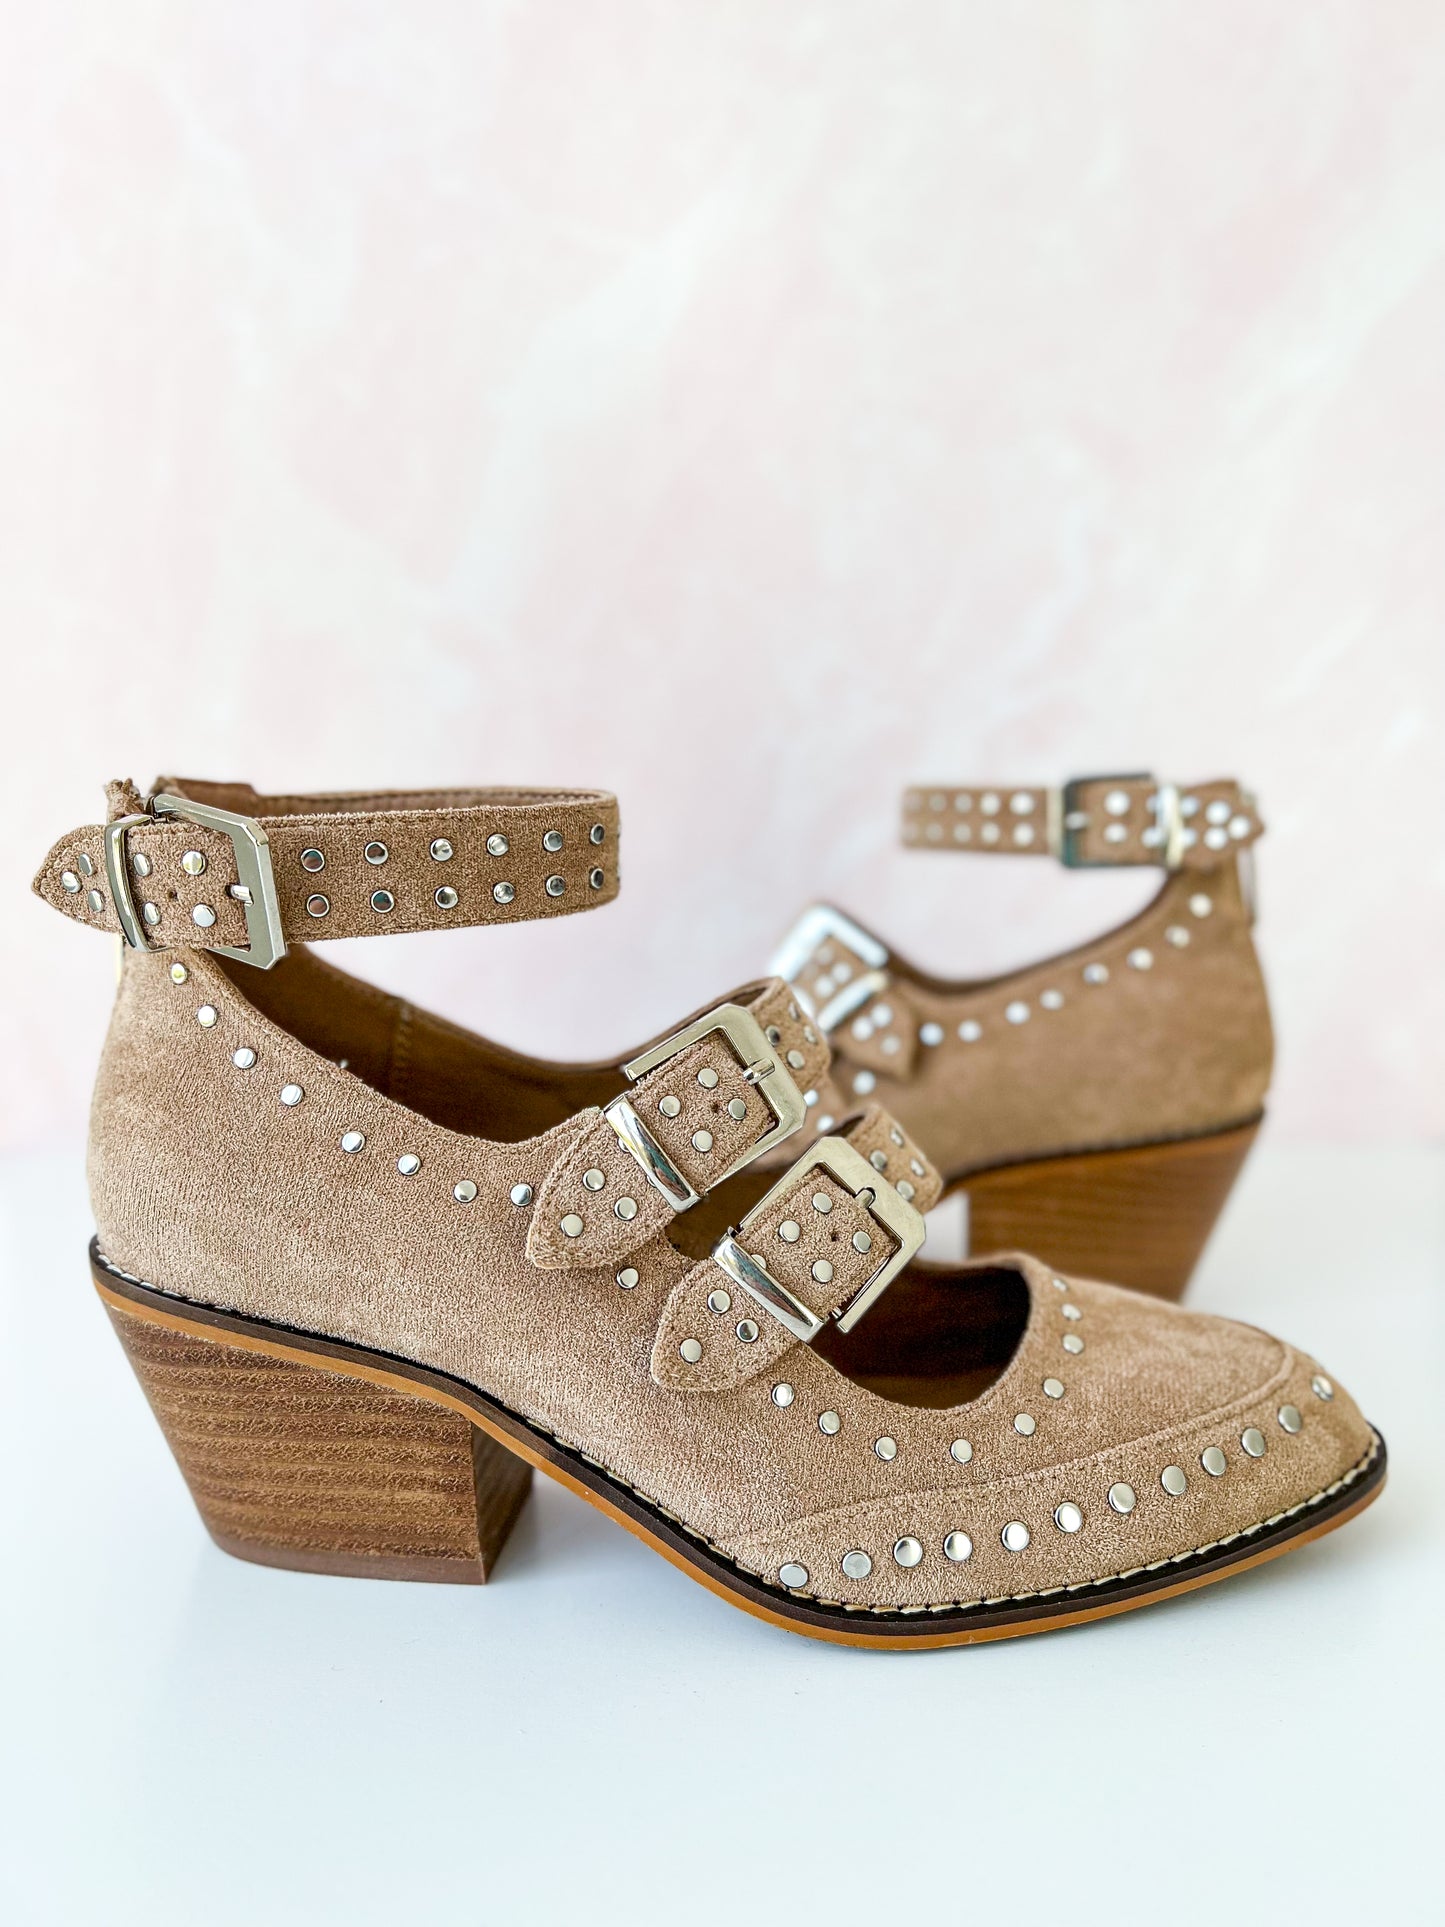 Corky's Cackle Wedge - Sand Suede